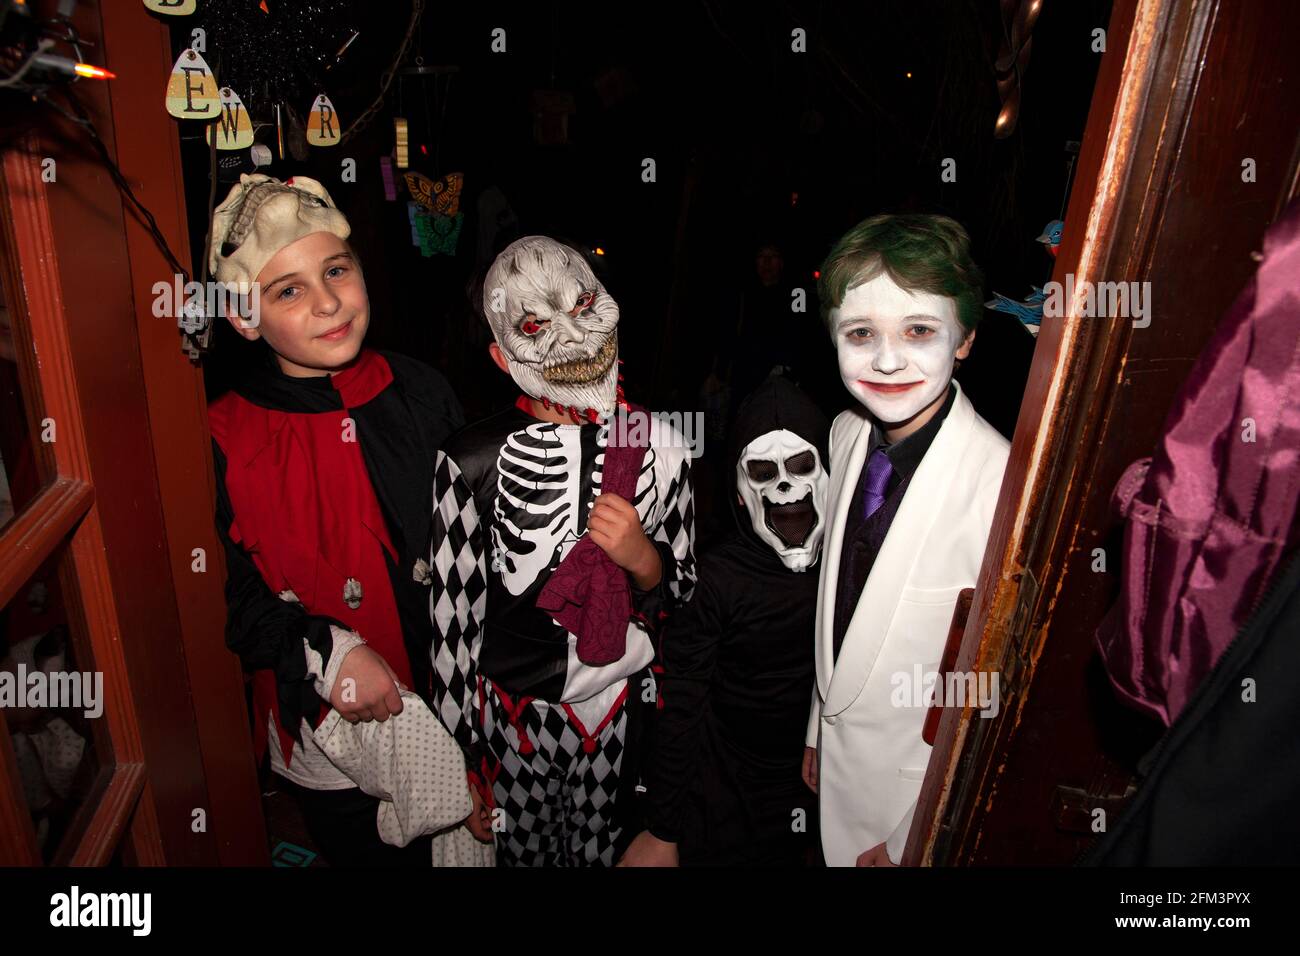 Halloween trick and treaters costumed as a skeleton, ghost, formal white jacketed, and jester. St Paul Minnesota MN USA Stock Photo